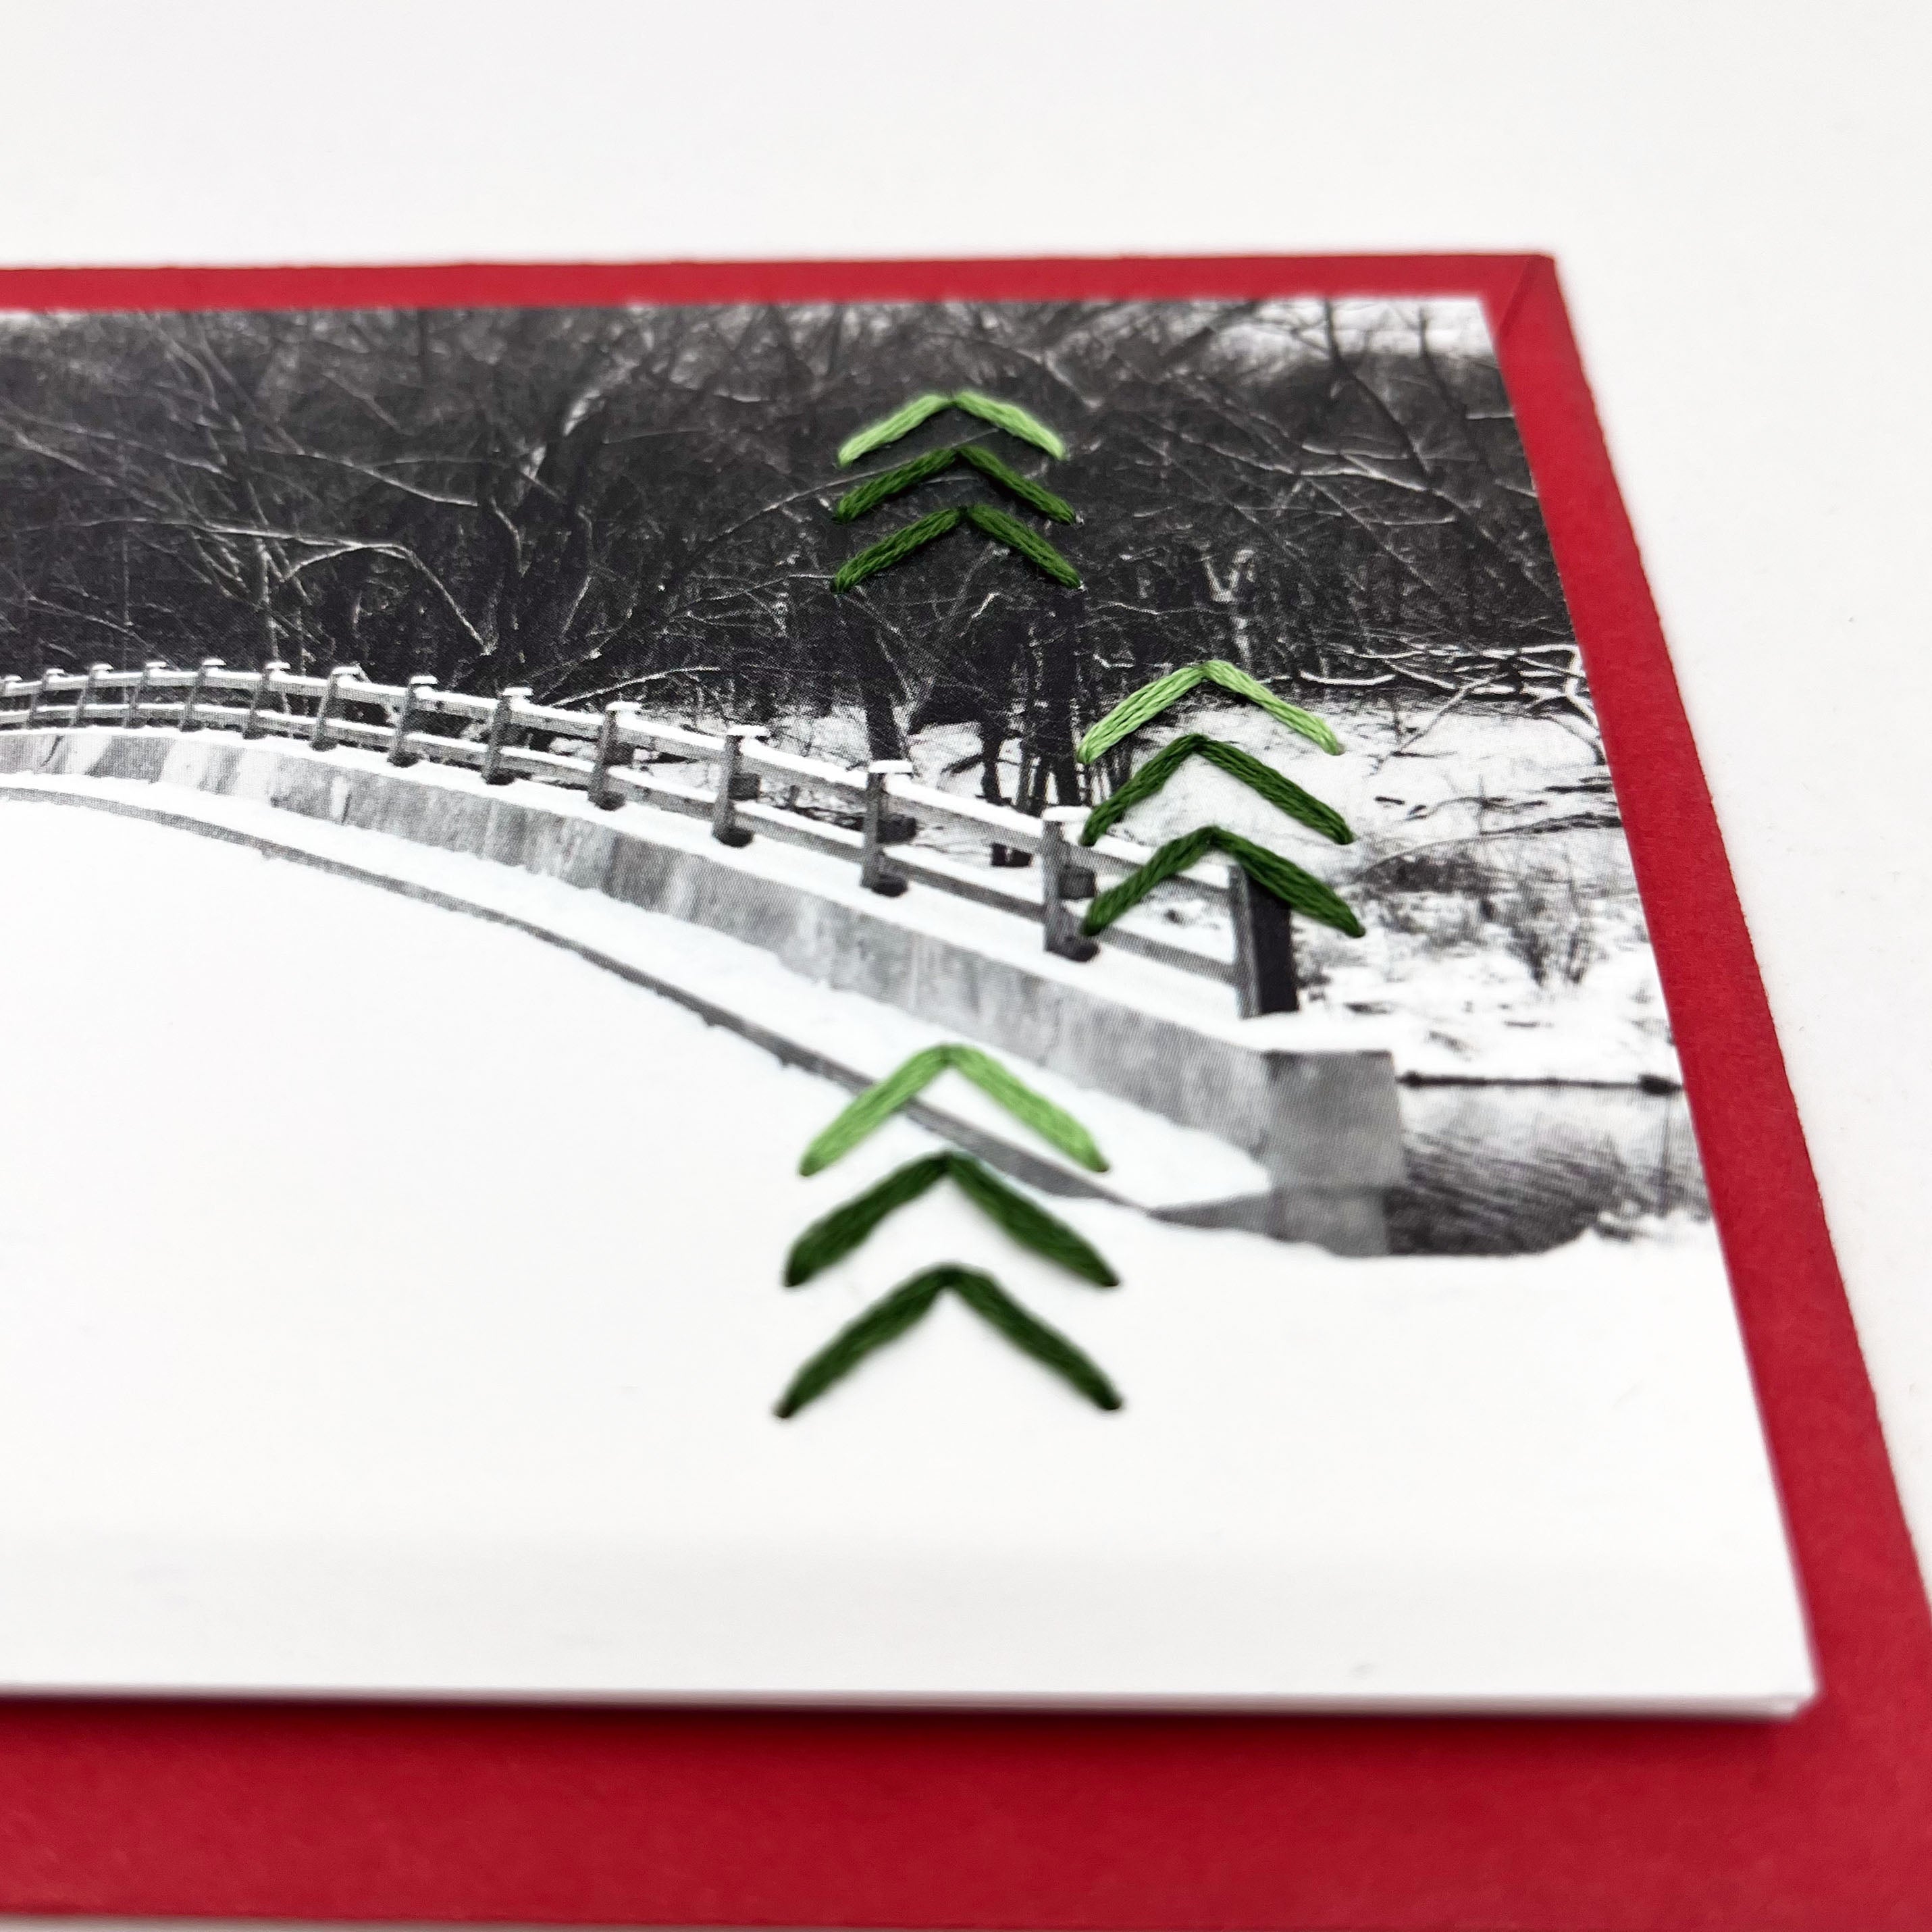 Greeting Card- Fall and Winter Scenes